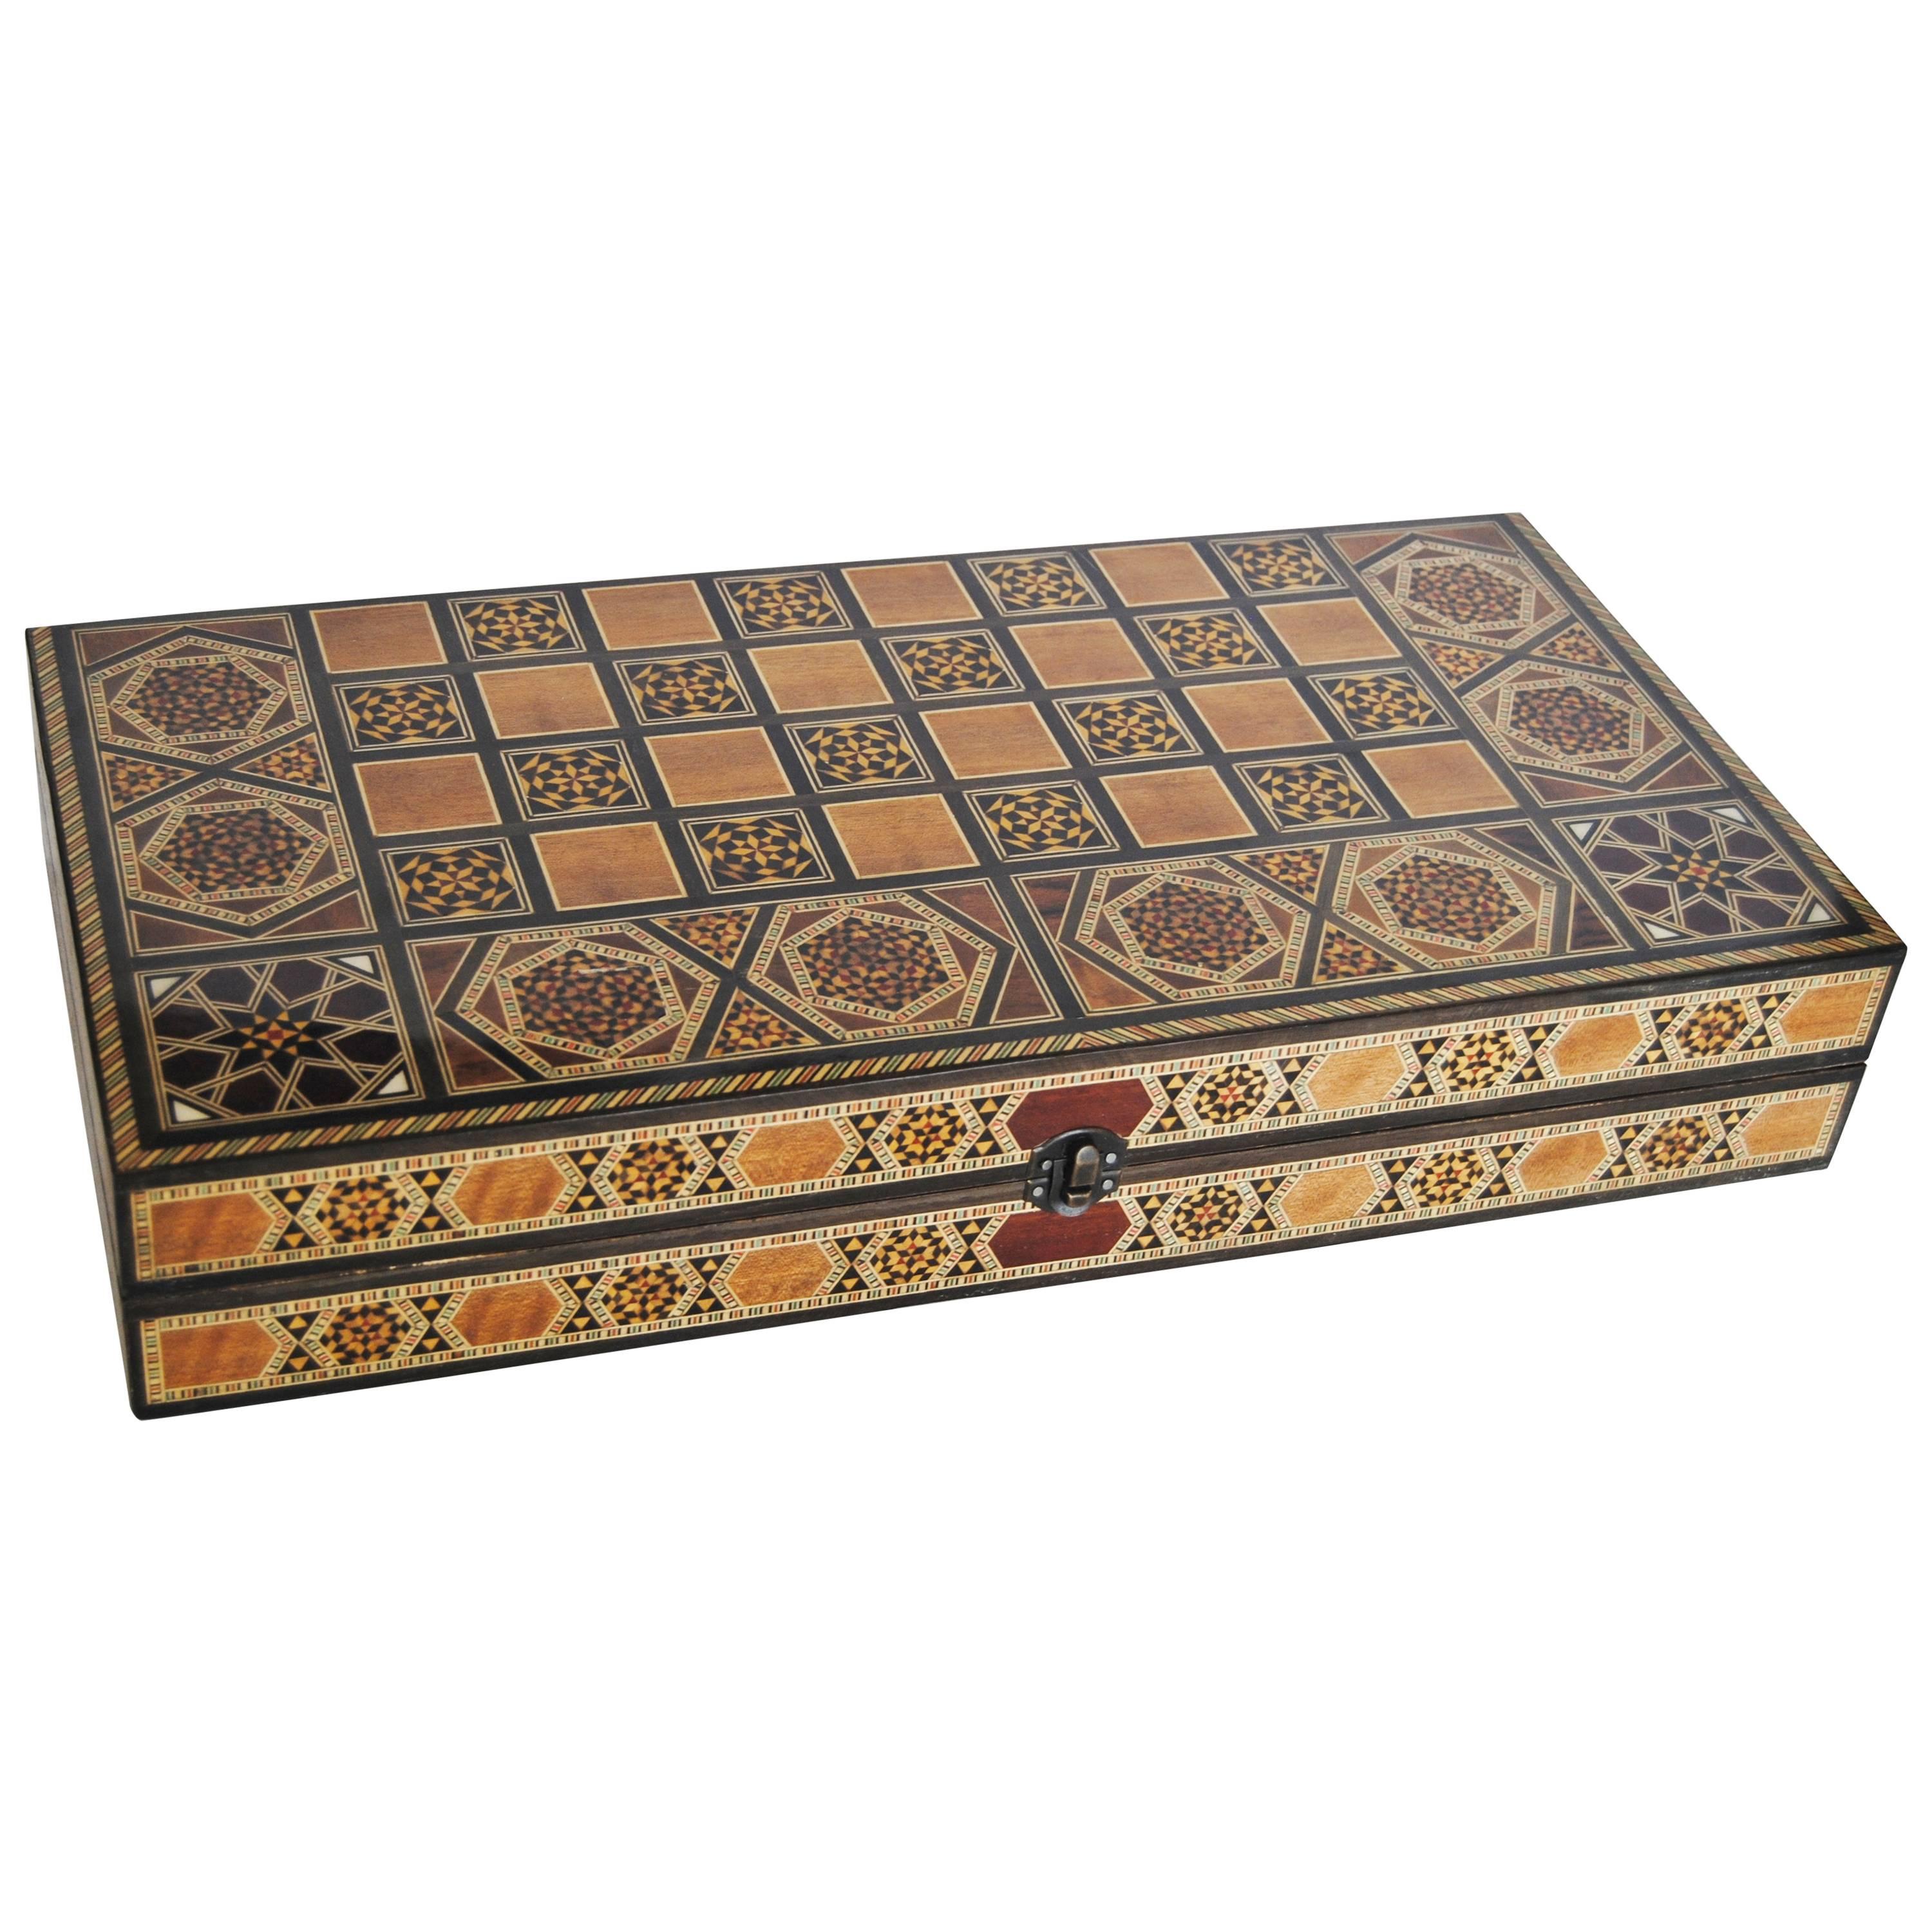 Syrian Handcrafted Backgammon/Chess Board with Inlaid Mother-of-Pearl